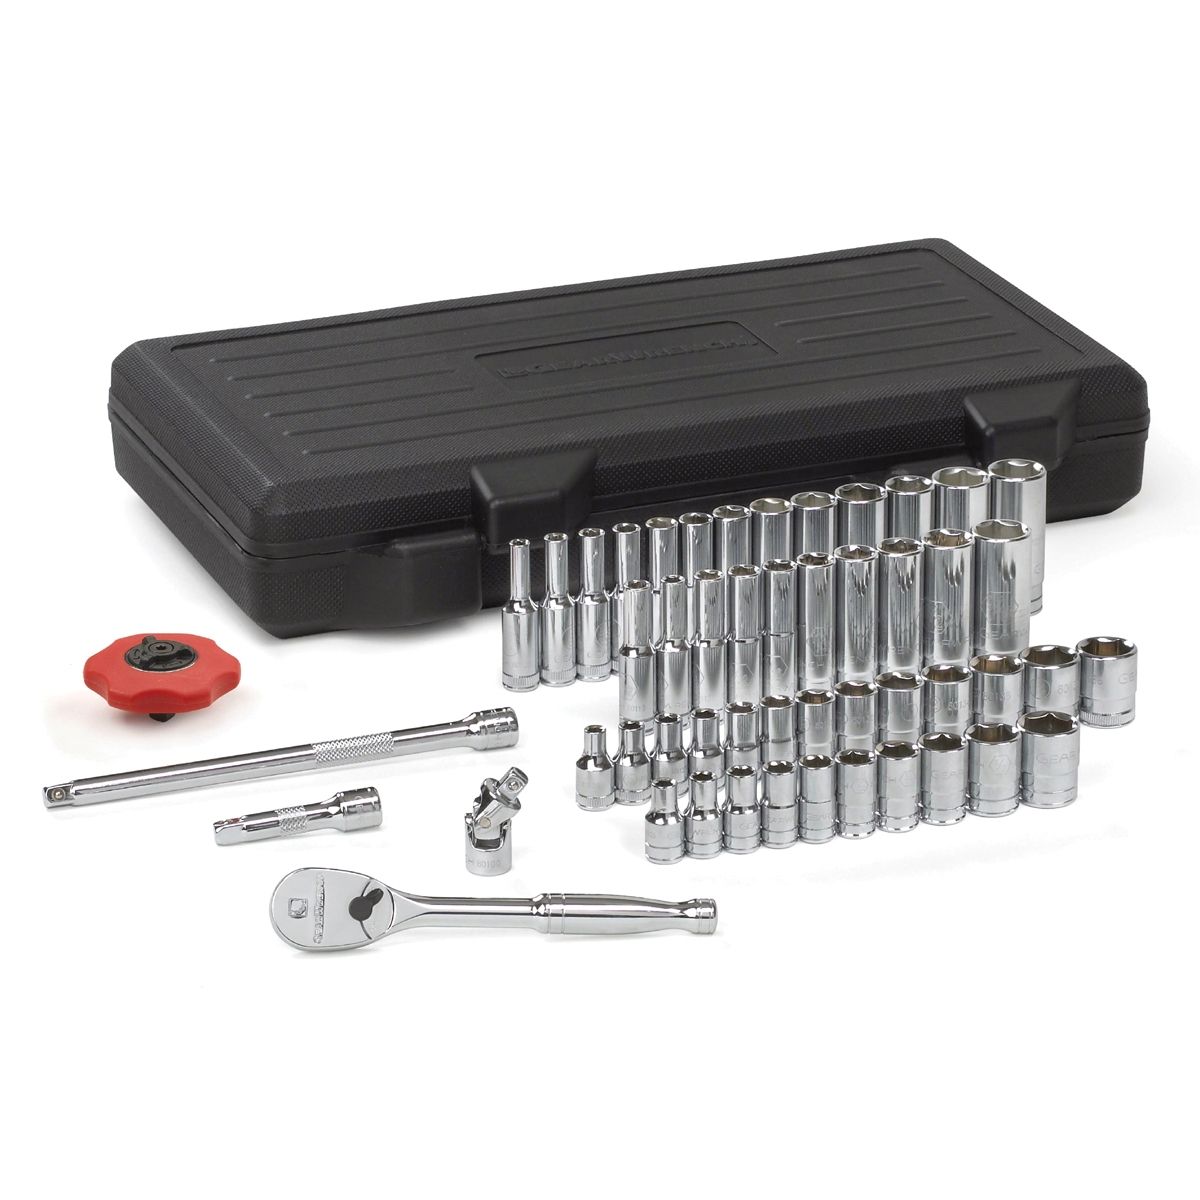 1/4 In Drive 6 Point SAE/Metric Socket Set - 51-Pc...